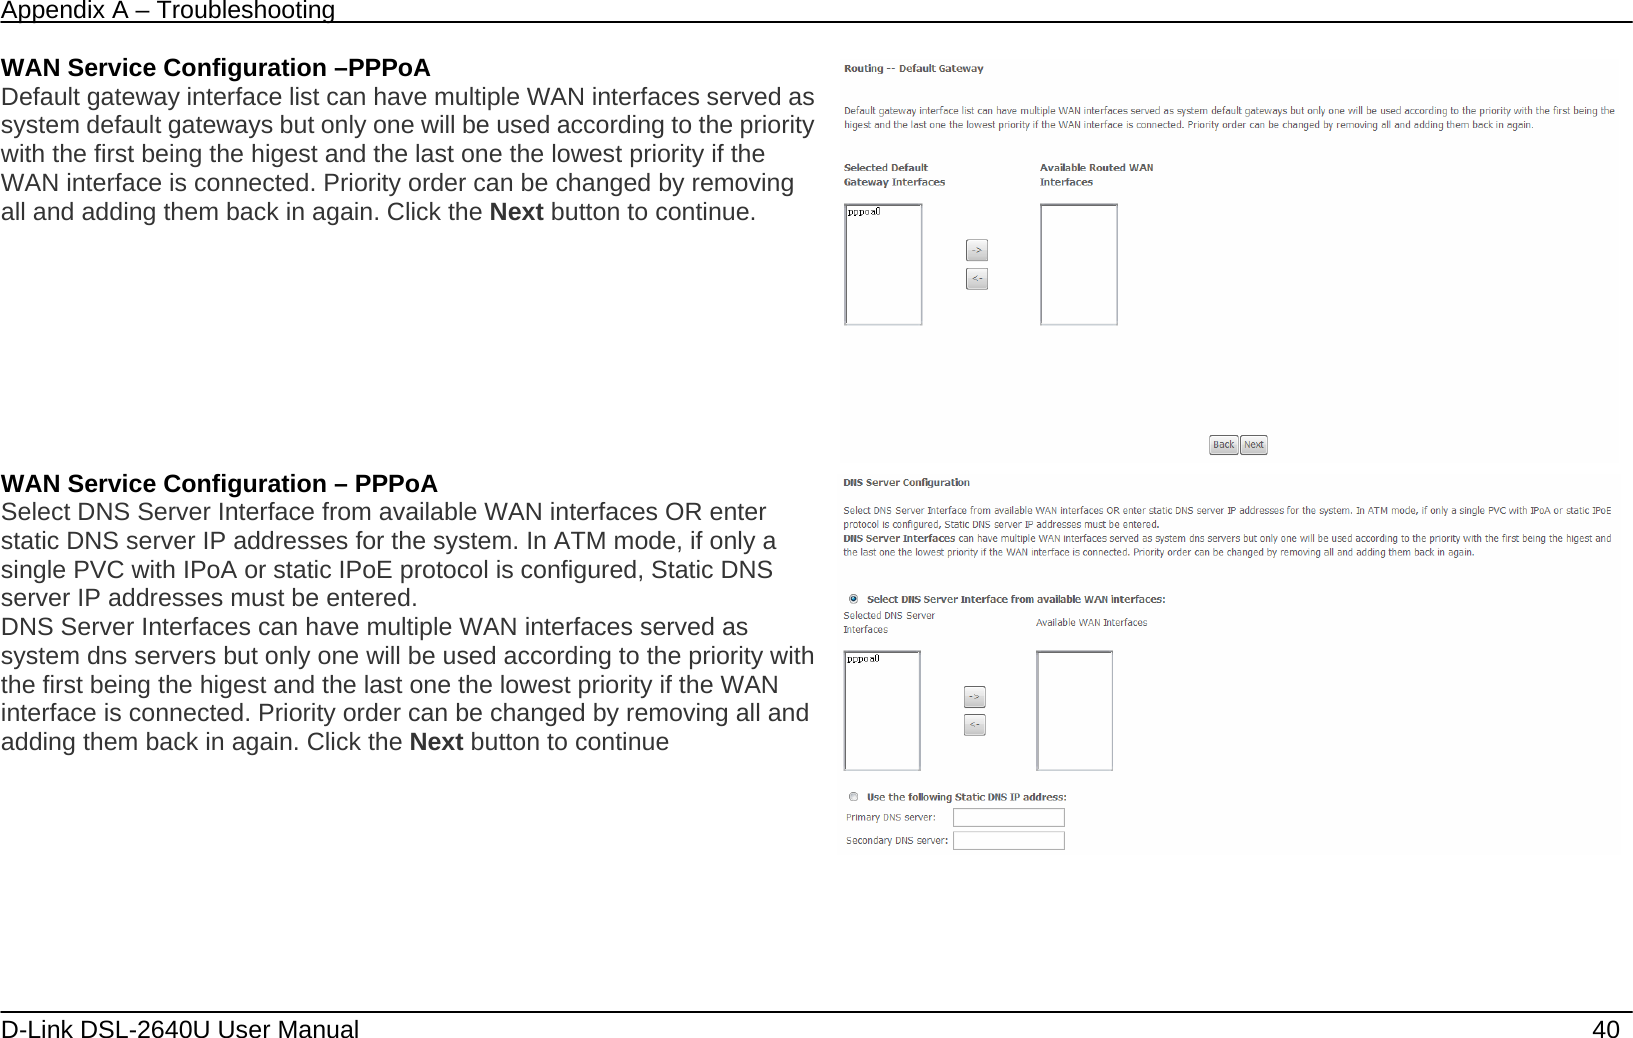 Appendix A – Troubleshooting   D-Link DSL-2640U User Manual    40 WAN Service Configuration –PPPoA Default gateway interface list can have multiple WAN interfaces served as system default gateways but only one will be used according to the priority with the first being the higest and the last one the lowest priority if the WAN interface is connected. Priority order can be changed by removing all and adding them back in again. Click the Next button to continue.  WAN Service Configuration – PPPoA Select DNS Server Interface from available WAN interfaces OR enter static DNS server IP addresses for the system. In ATM mode, if only a single PVC with IPoA or static IPoE protocol is configured, Static DNS server IP addresses must be entered. DNS Server Interfaces can have multiple WAN interfaces served as system dns servers but only one will be used according to the priority with the first being the higest and the last one the lowest priority if the WAN interface is connected. Priority order can be changed by removing all and adding them back in again. Click the Next button to continue         